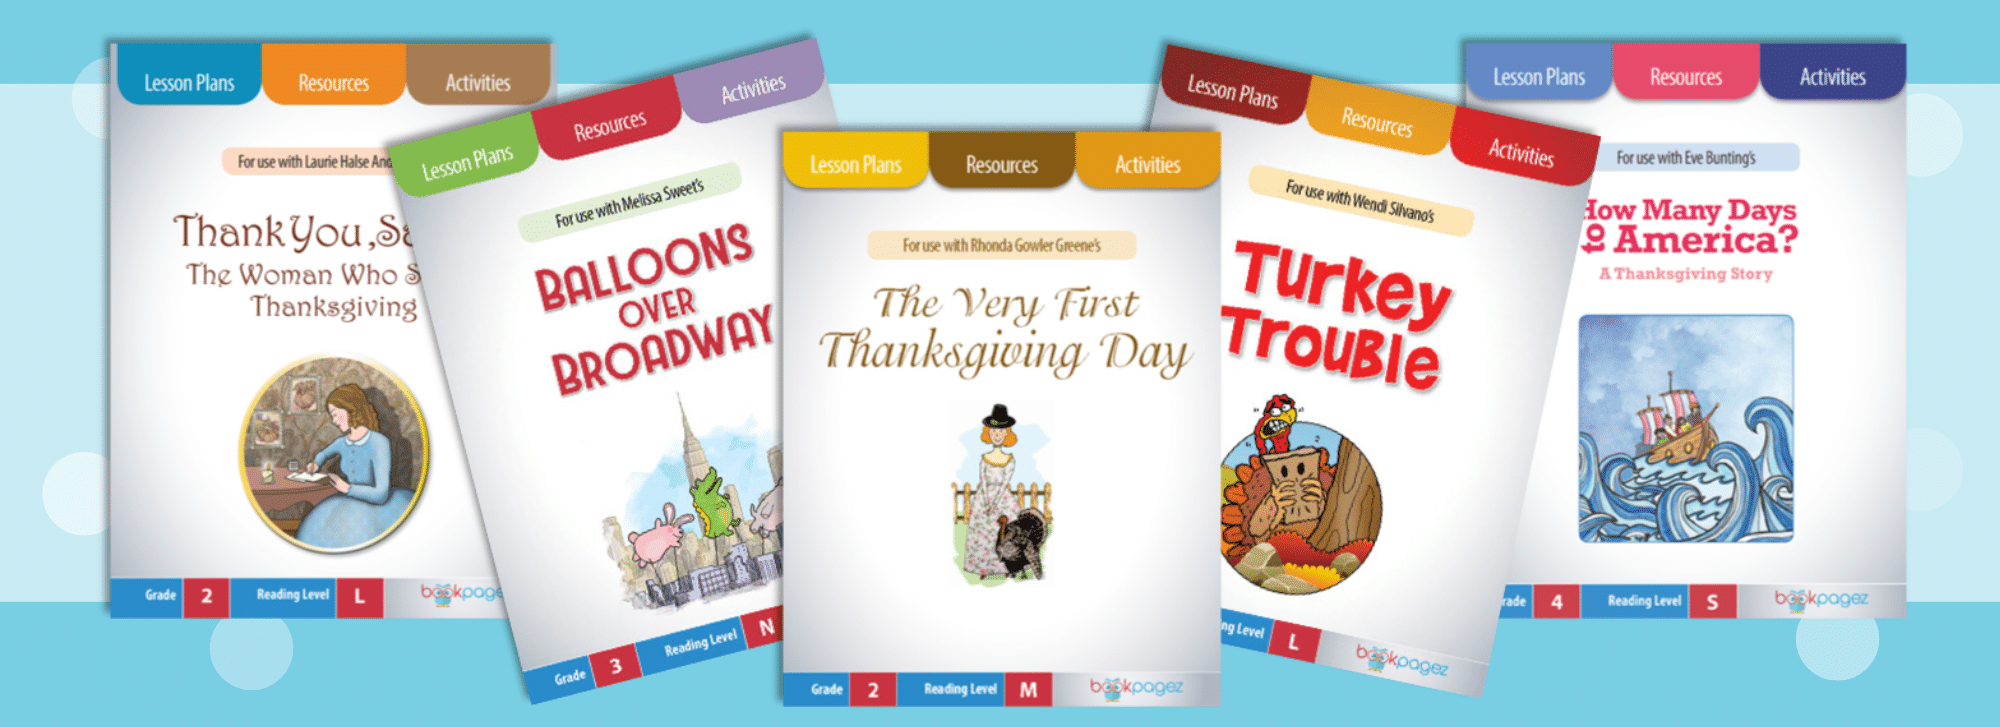 Covers of the best books to teach the story of Thanksgiving to K-5 students